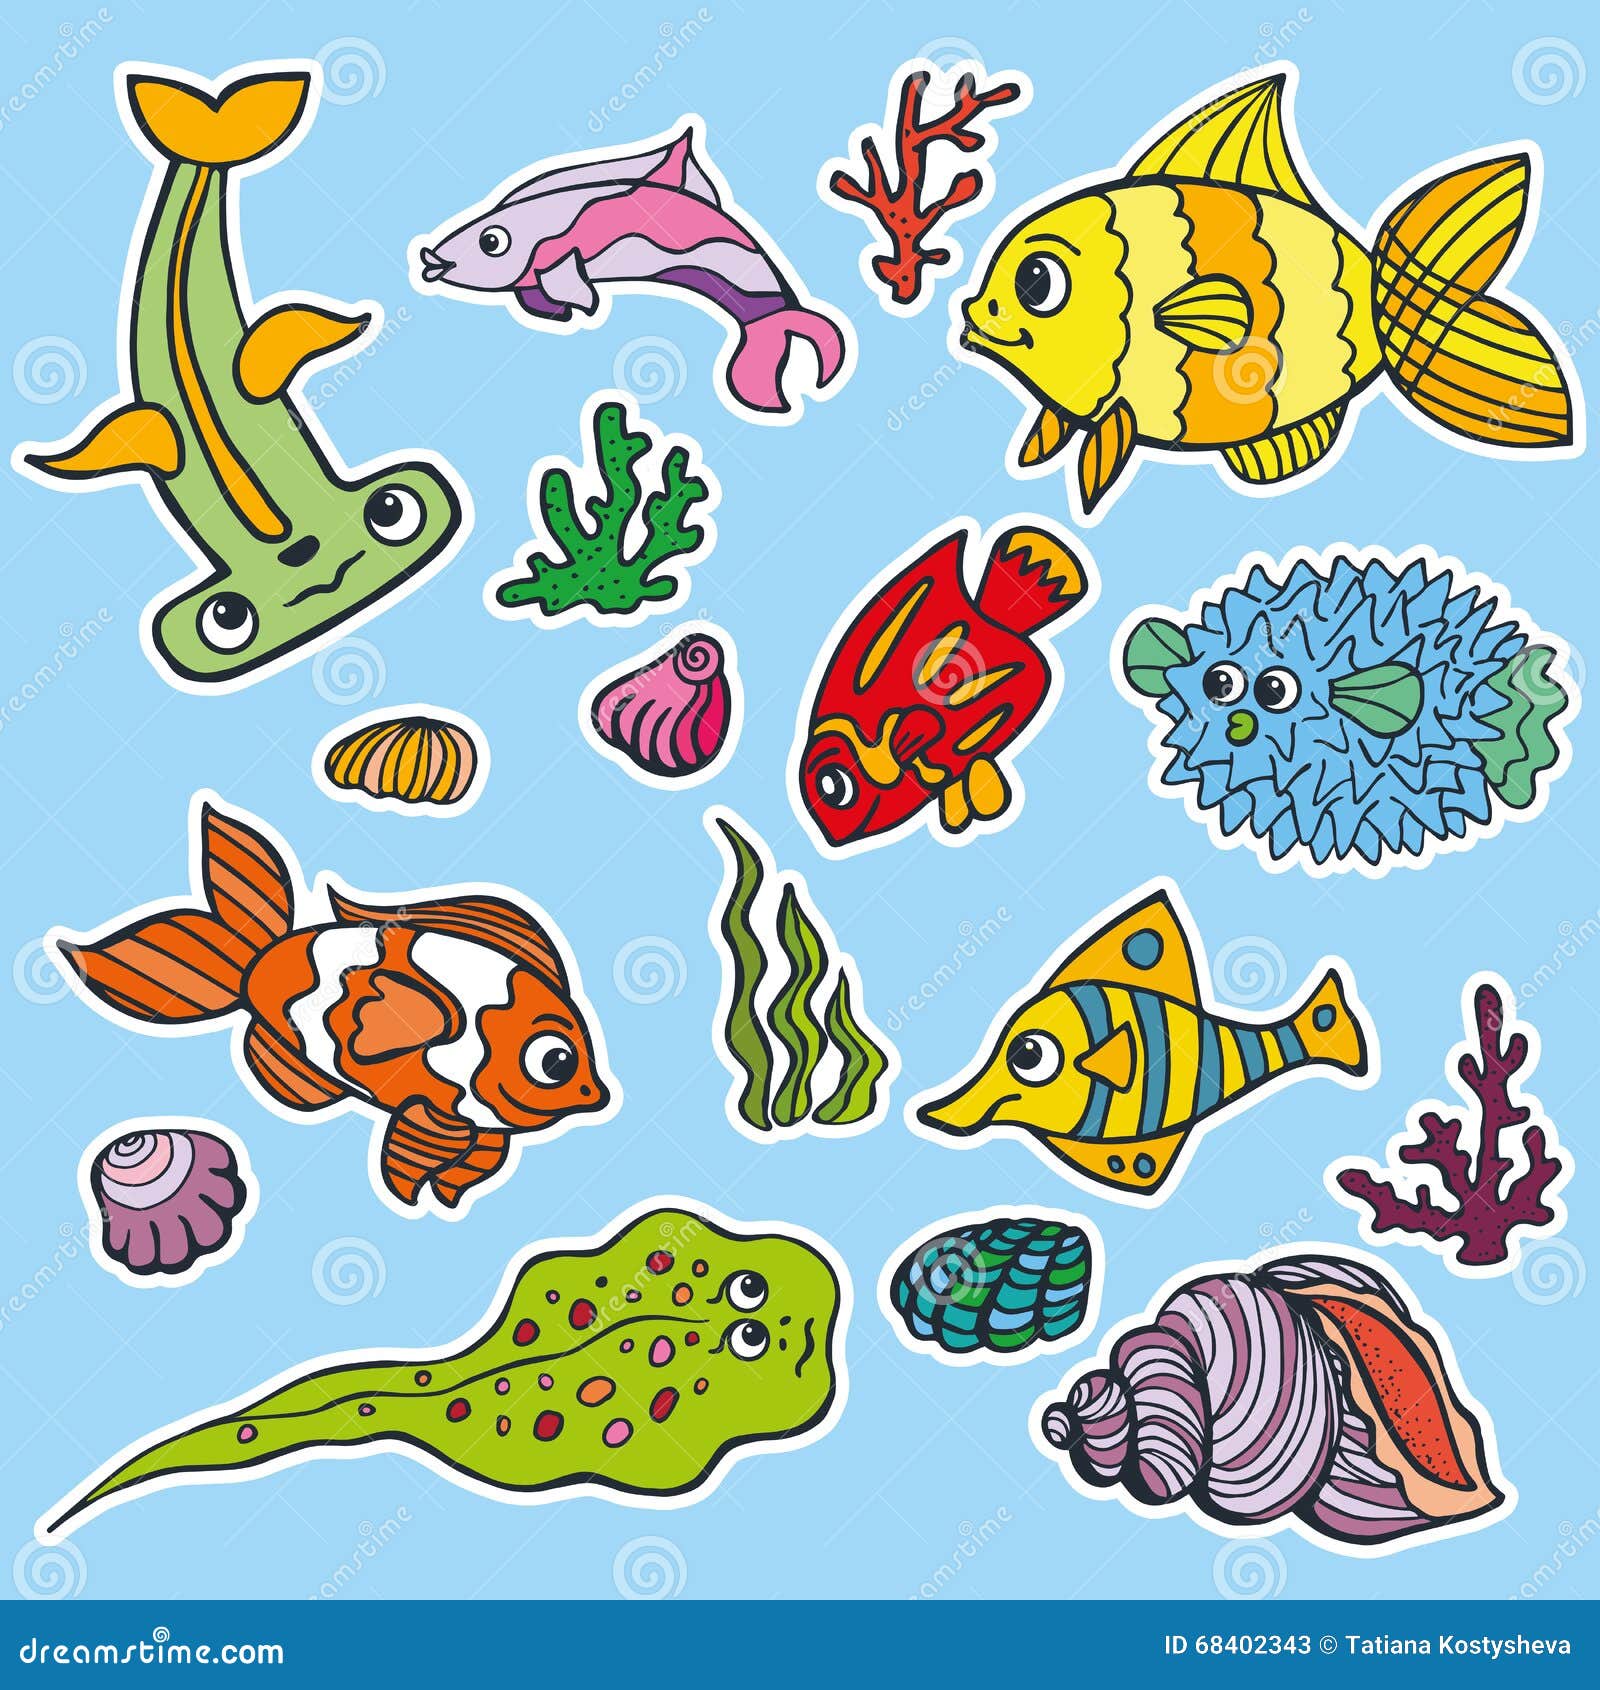 How To Draw Fish : Step-by-Step Fish Drawing Book for Kids and Beginners  Learn to Draw Sea Animals, Fishes (Paperback) - Walmart.com